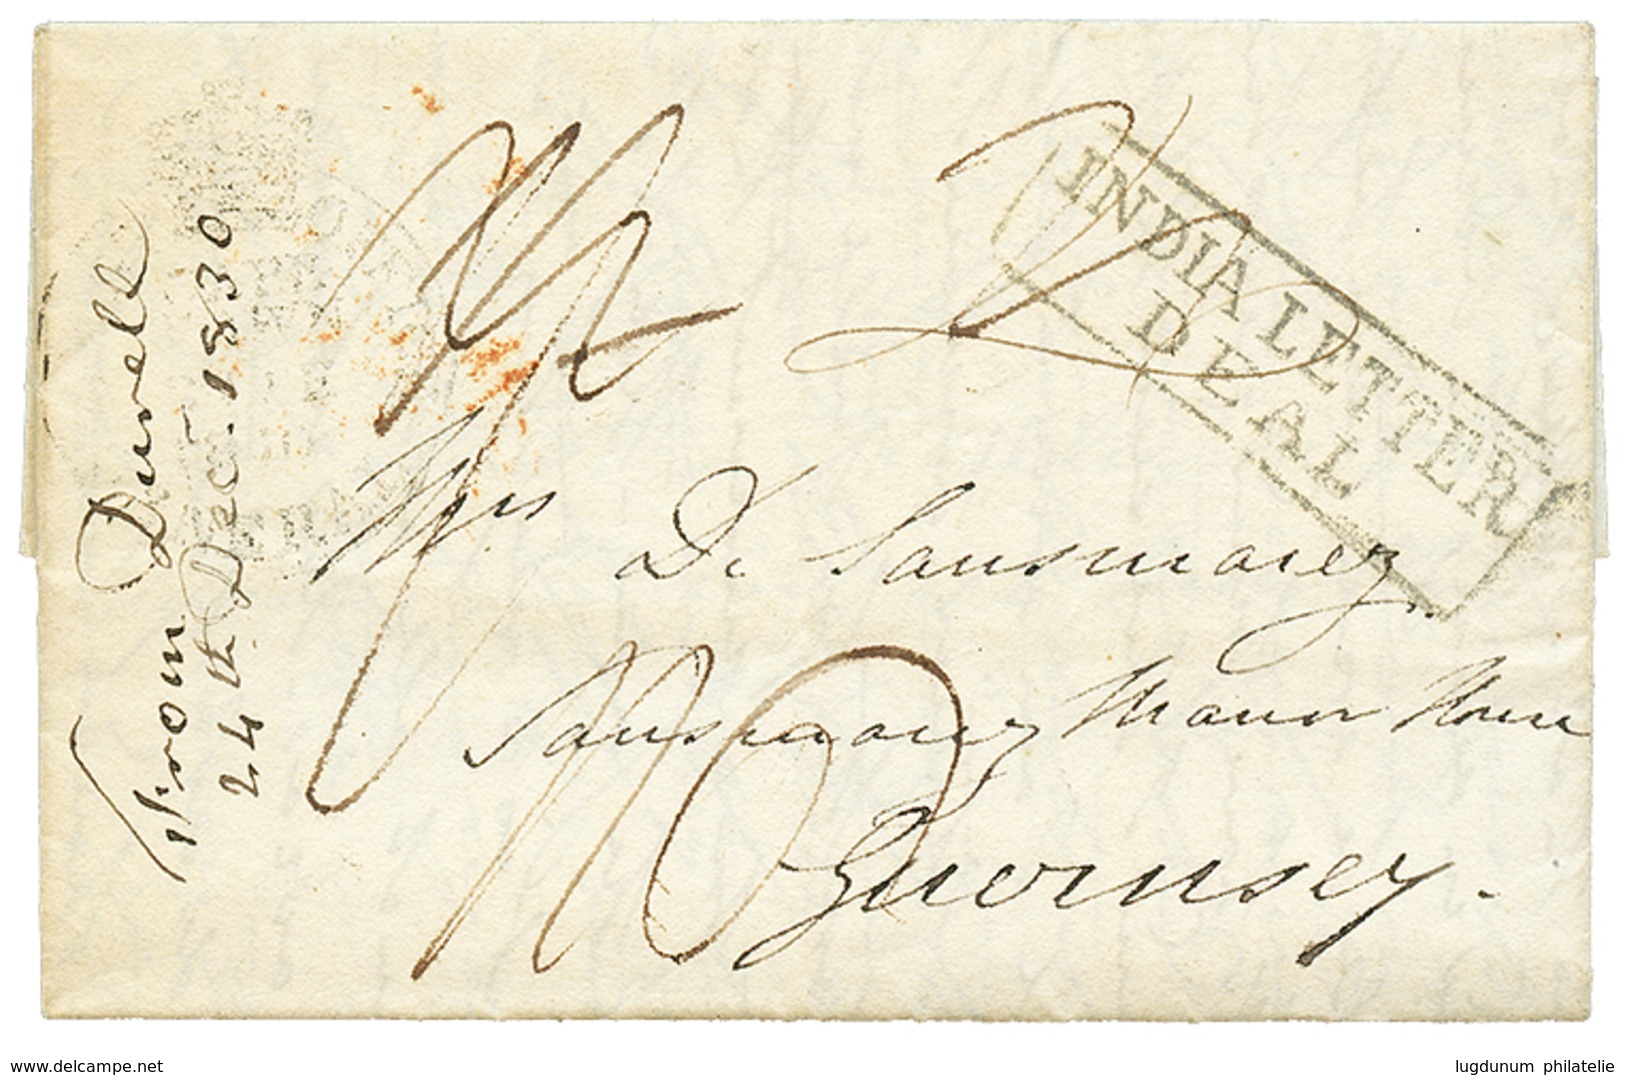 558 CAPE OF GOOD HOPE To GUERNESEY : 1830 INDIA LETTER DEAL On Entire Letter From CAPE OF GOOD HOPE To GUERNESEY. Superb - Guernsey